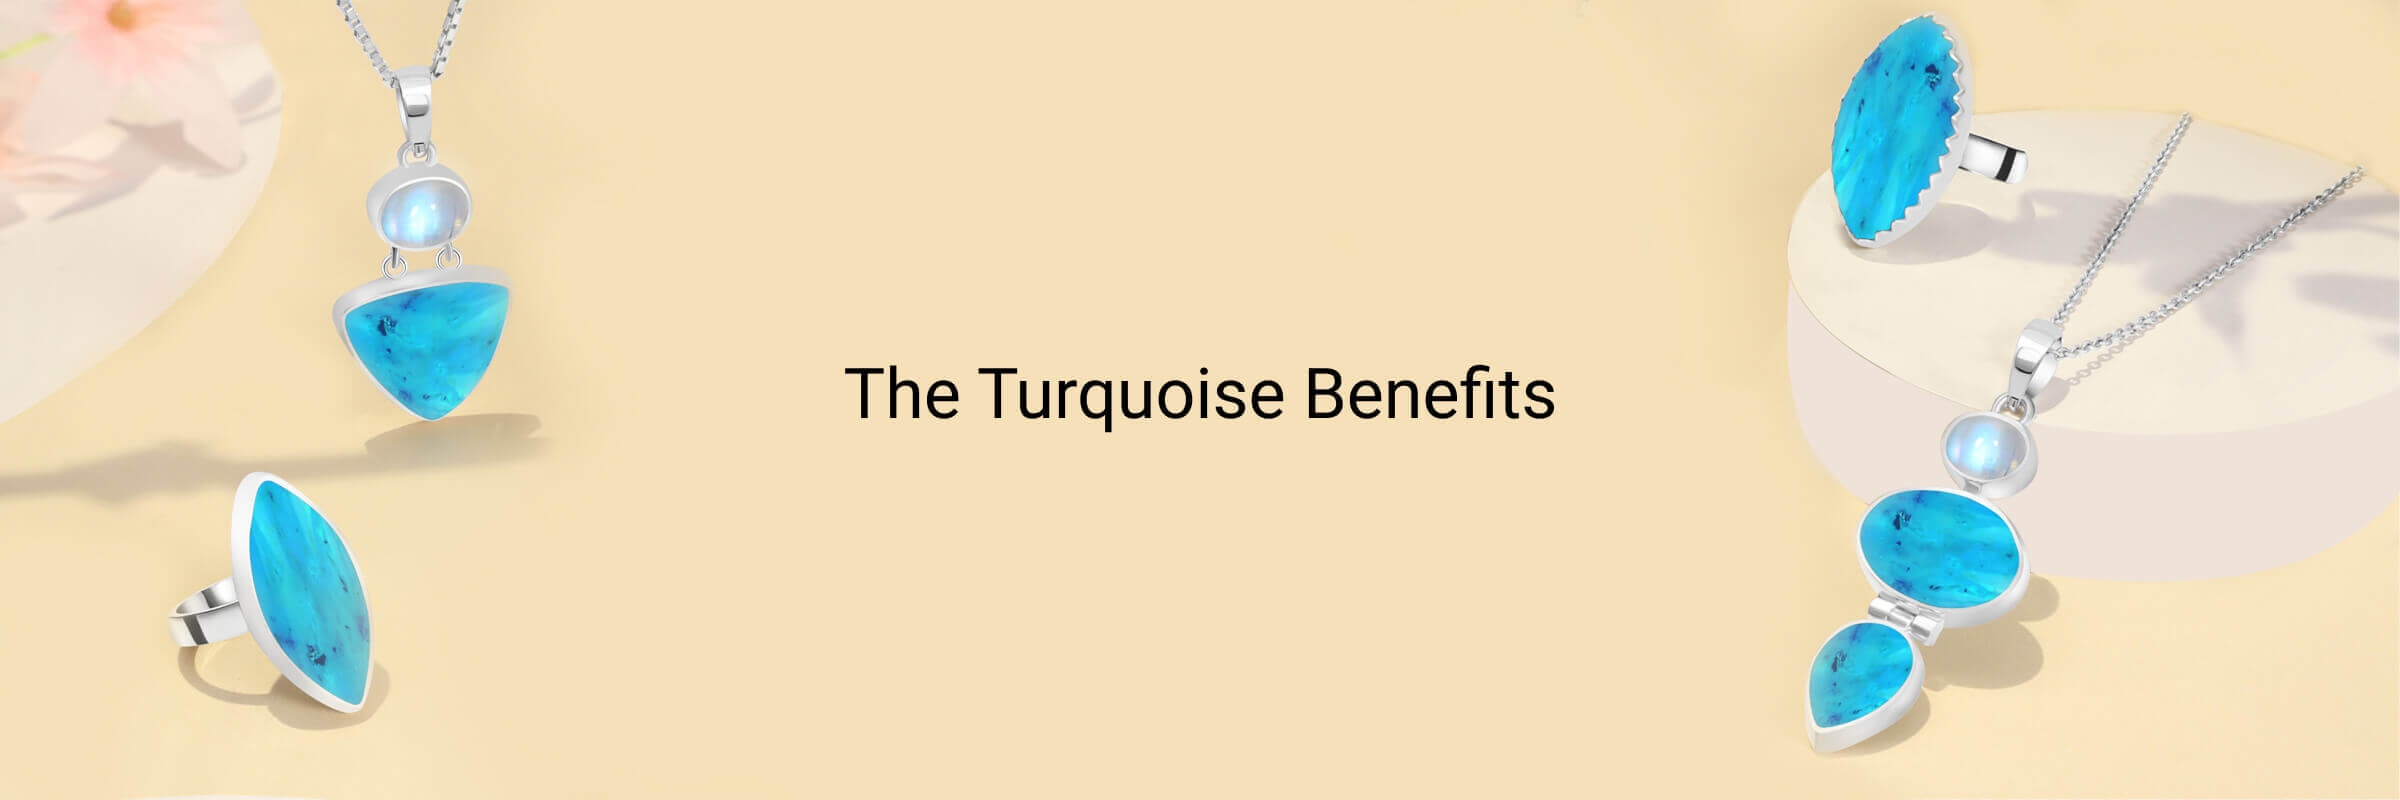 Benefit of Turquoise Jewelry